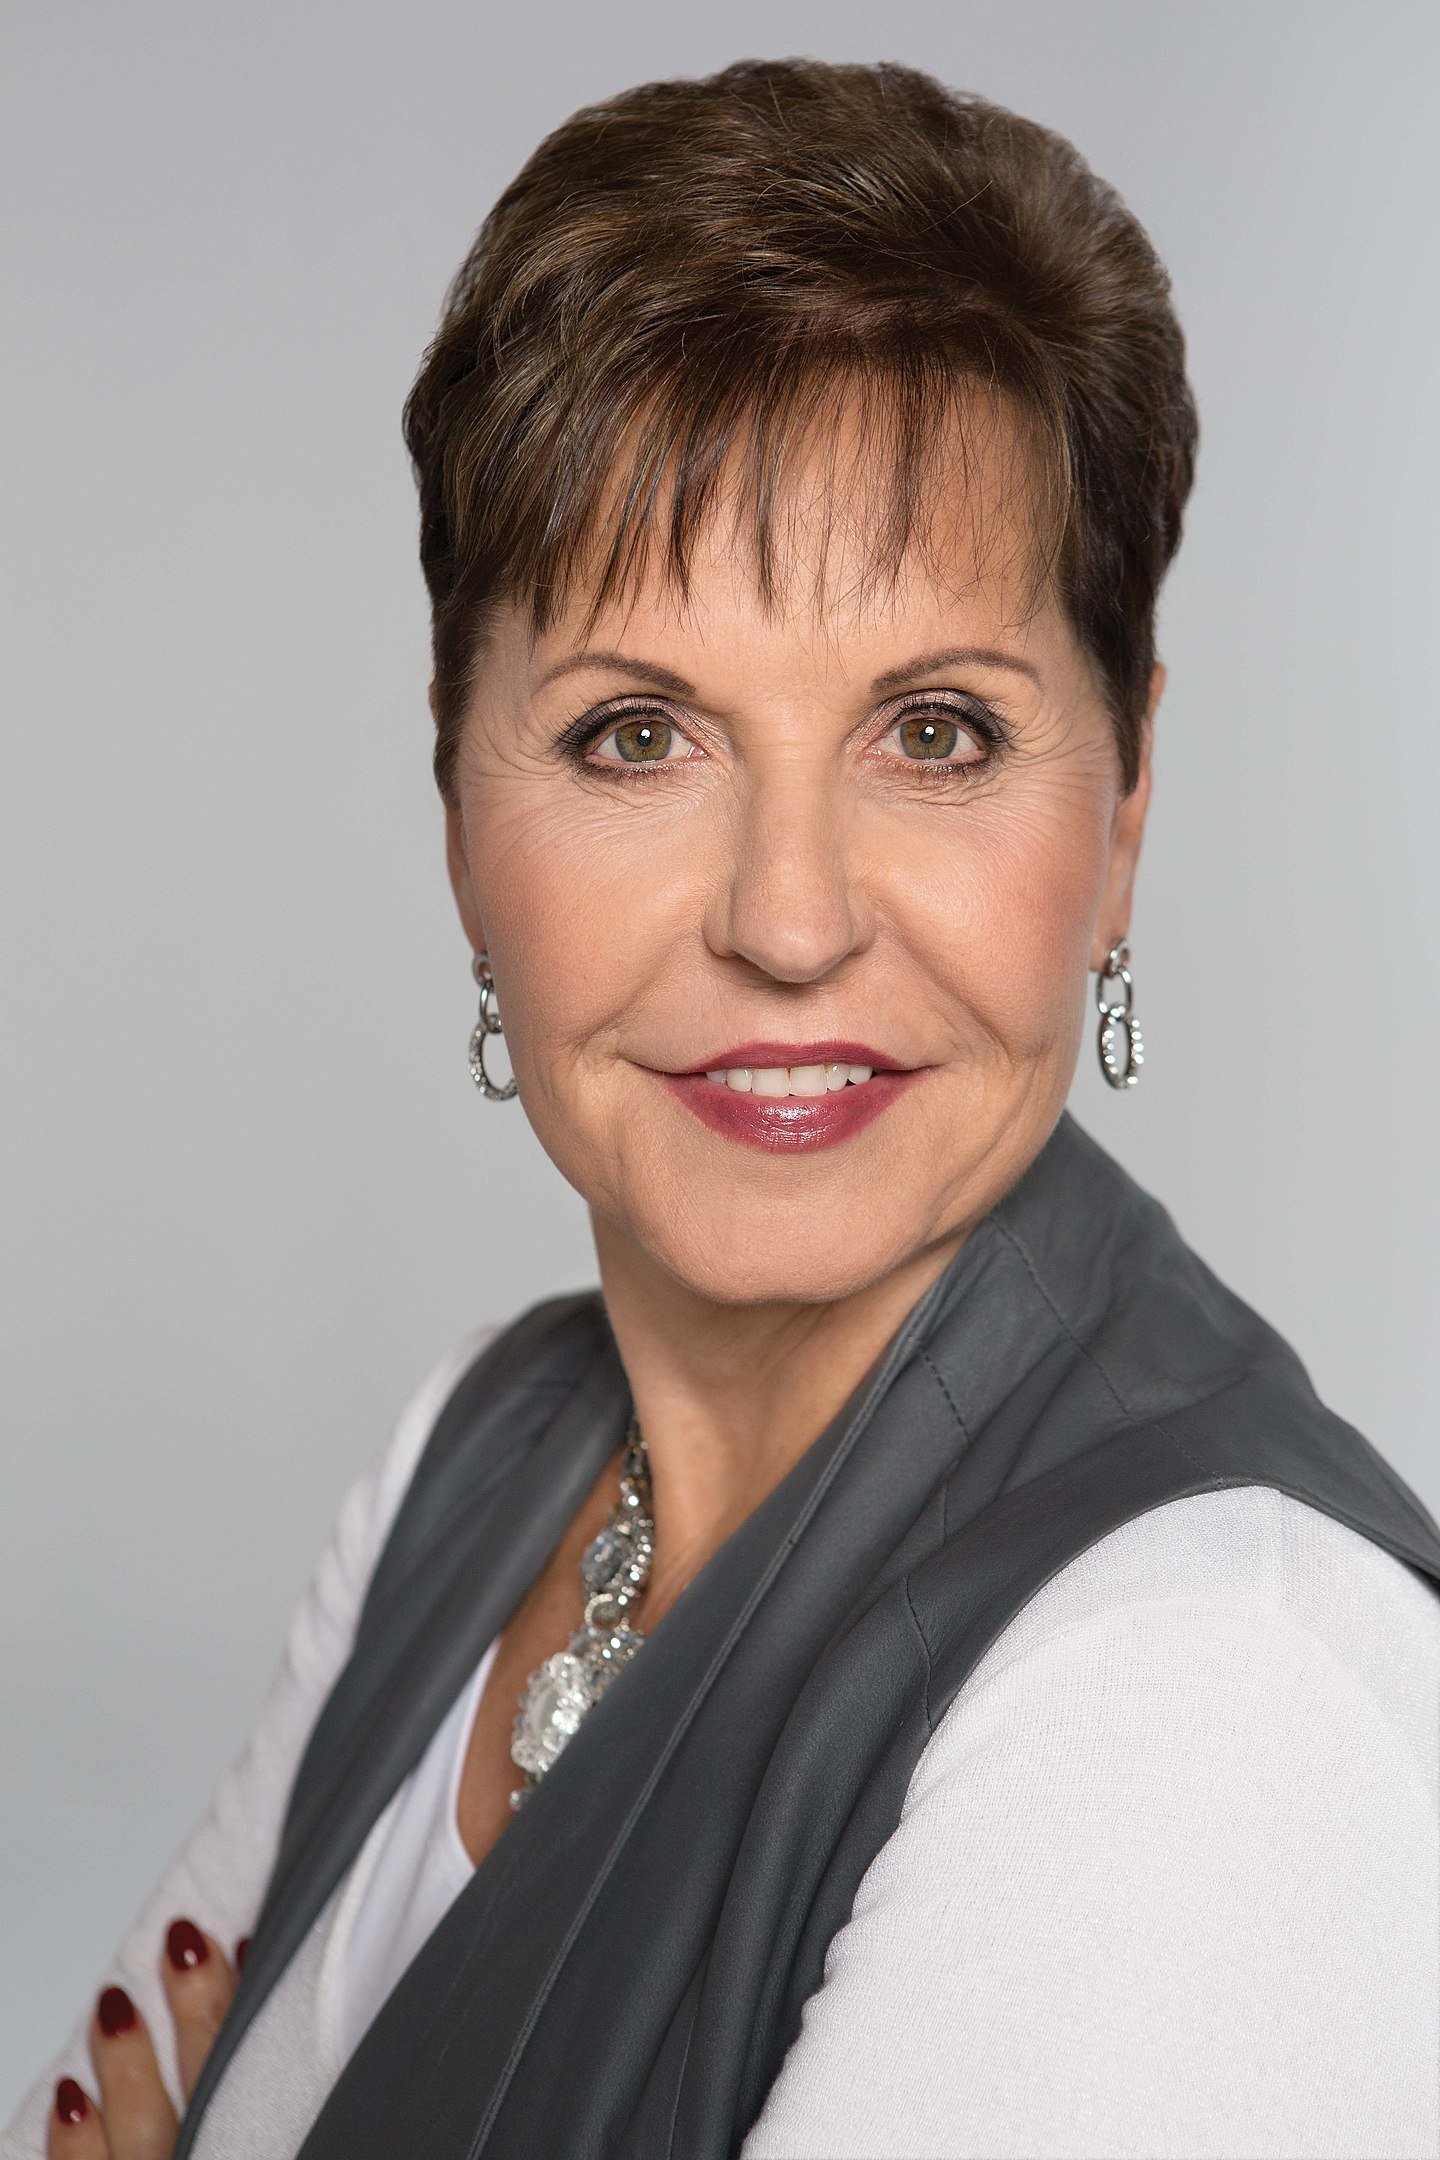 Joyce Meyer in 2015 | Photo By JM viki - Own work, CC BY-SA 4.0, Wikimedia Commons Images